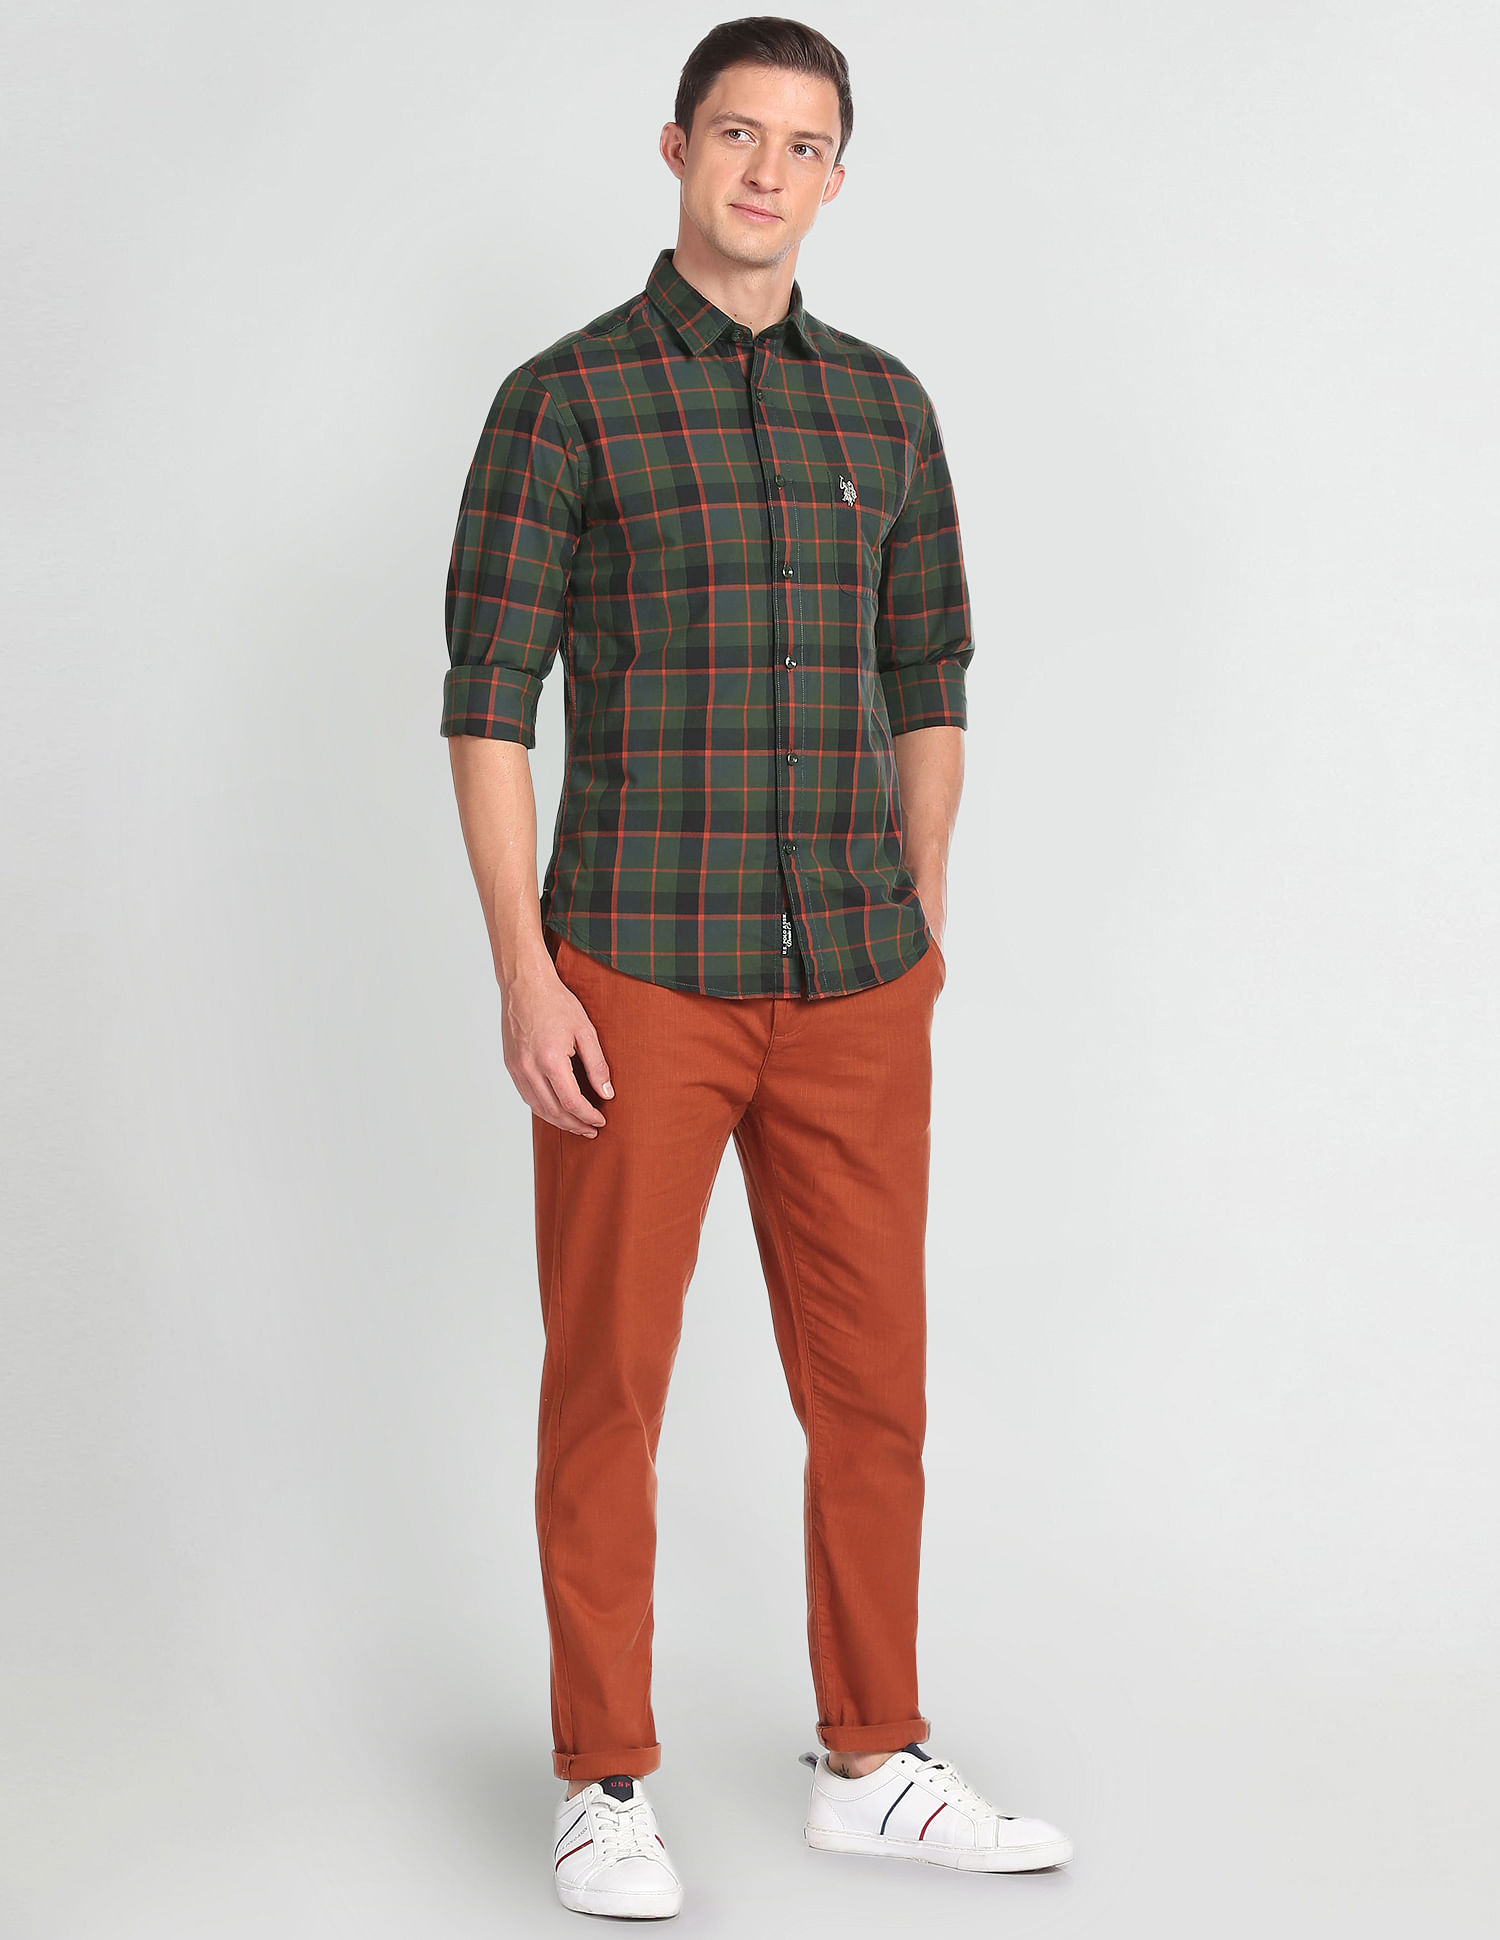 10 Red Shirt Matching Pant Ideas For Men - Hiscraves